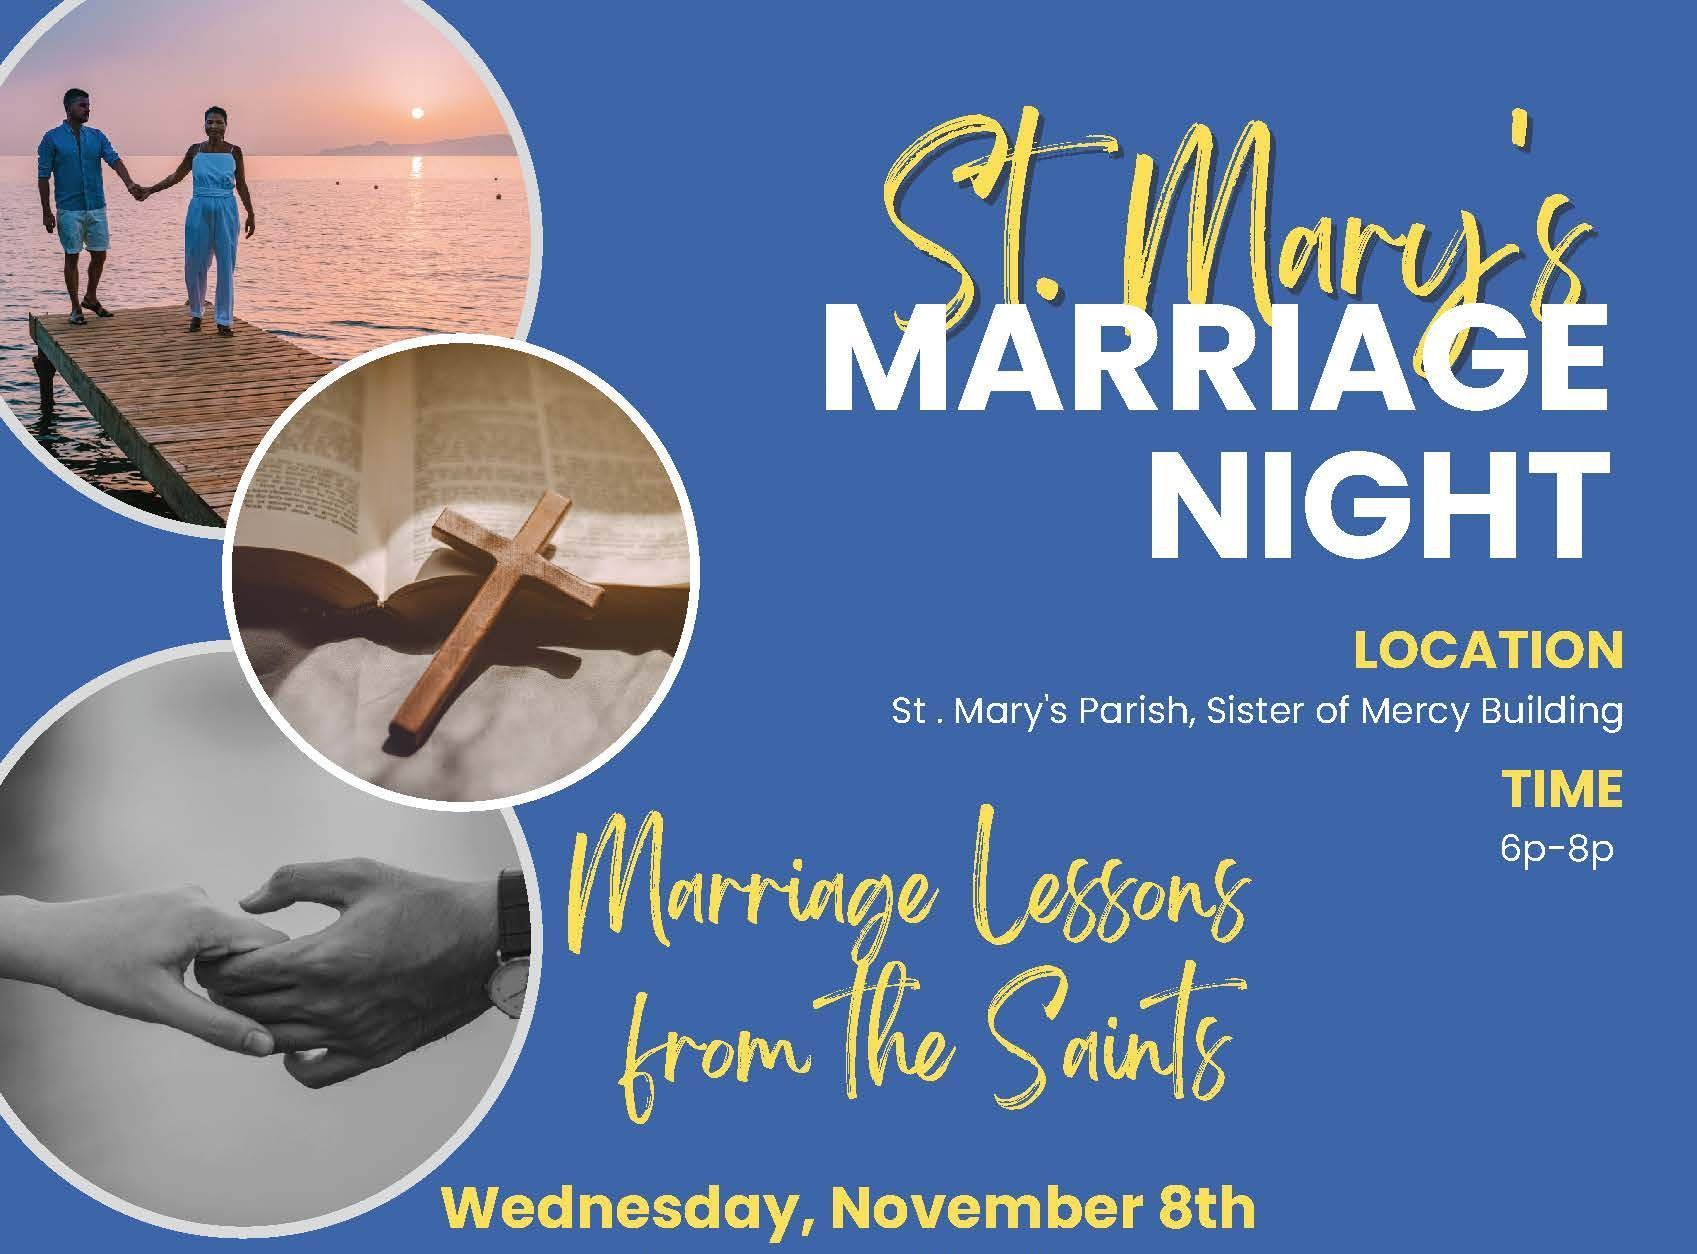 Flyer for St. Mary's Marriage Night with details